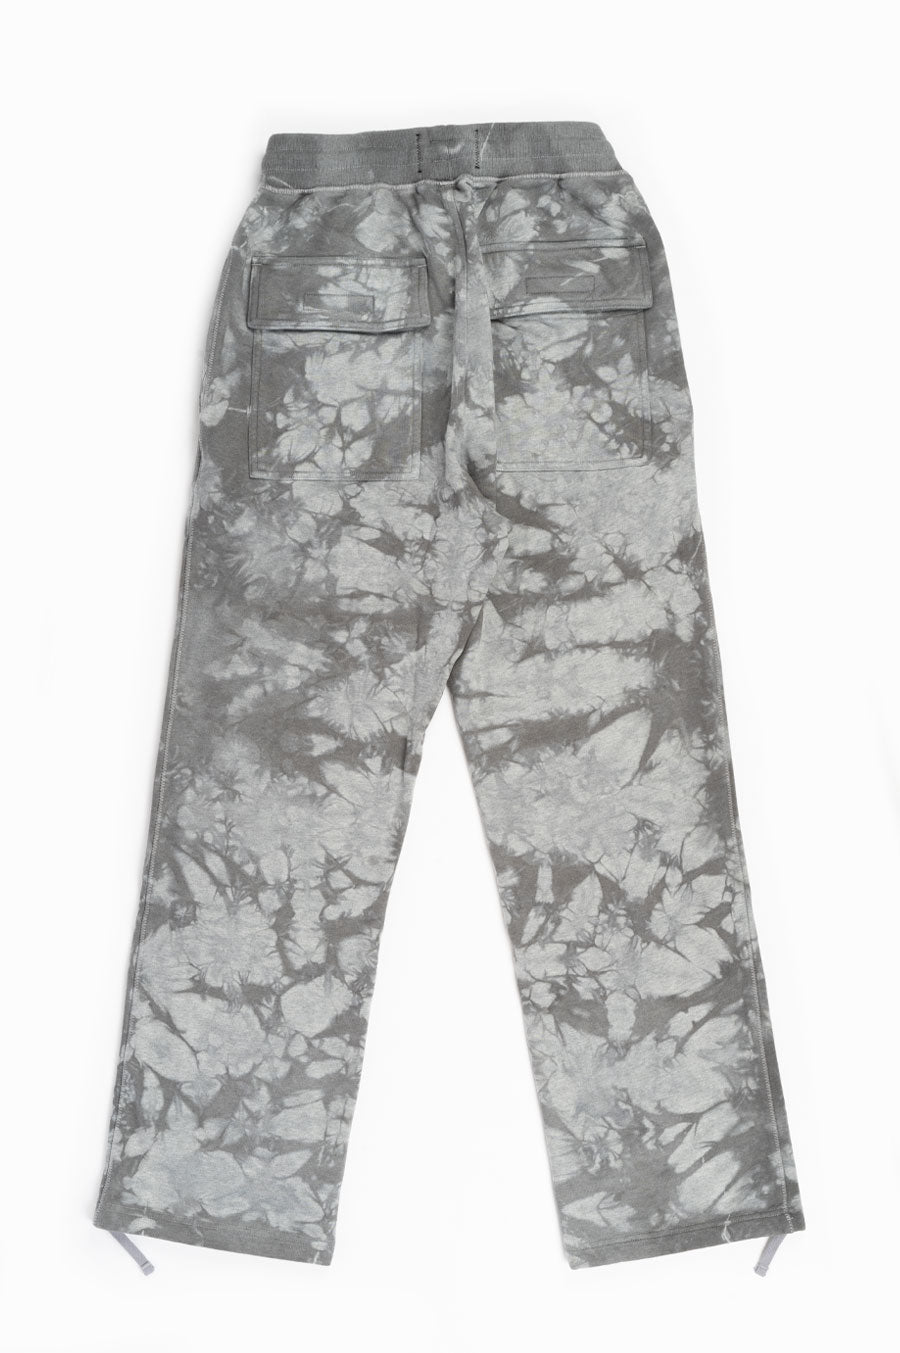 REIGNING CHAMP S04 TIE DYE TRACK PANT HEATHER GREY